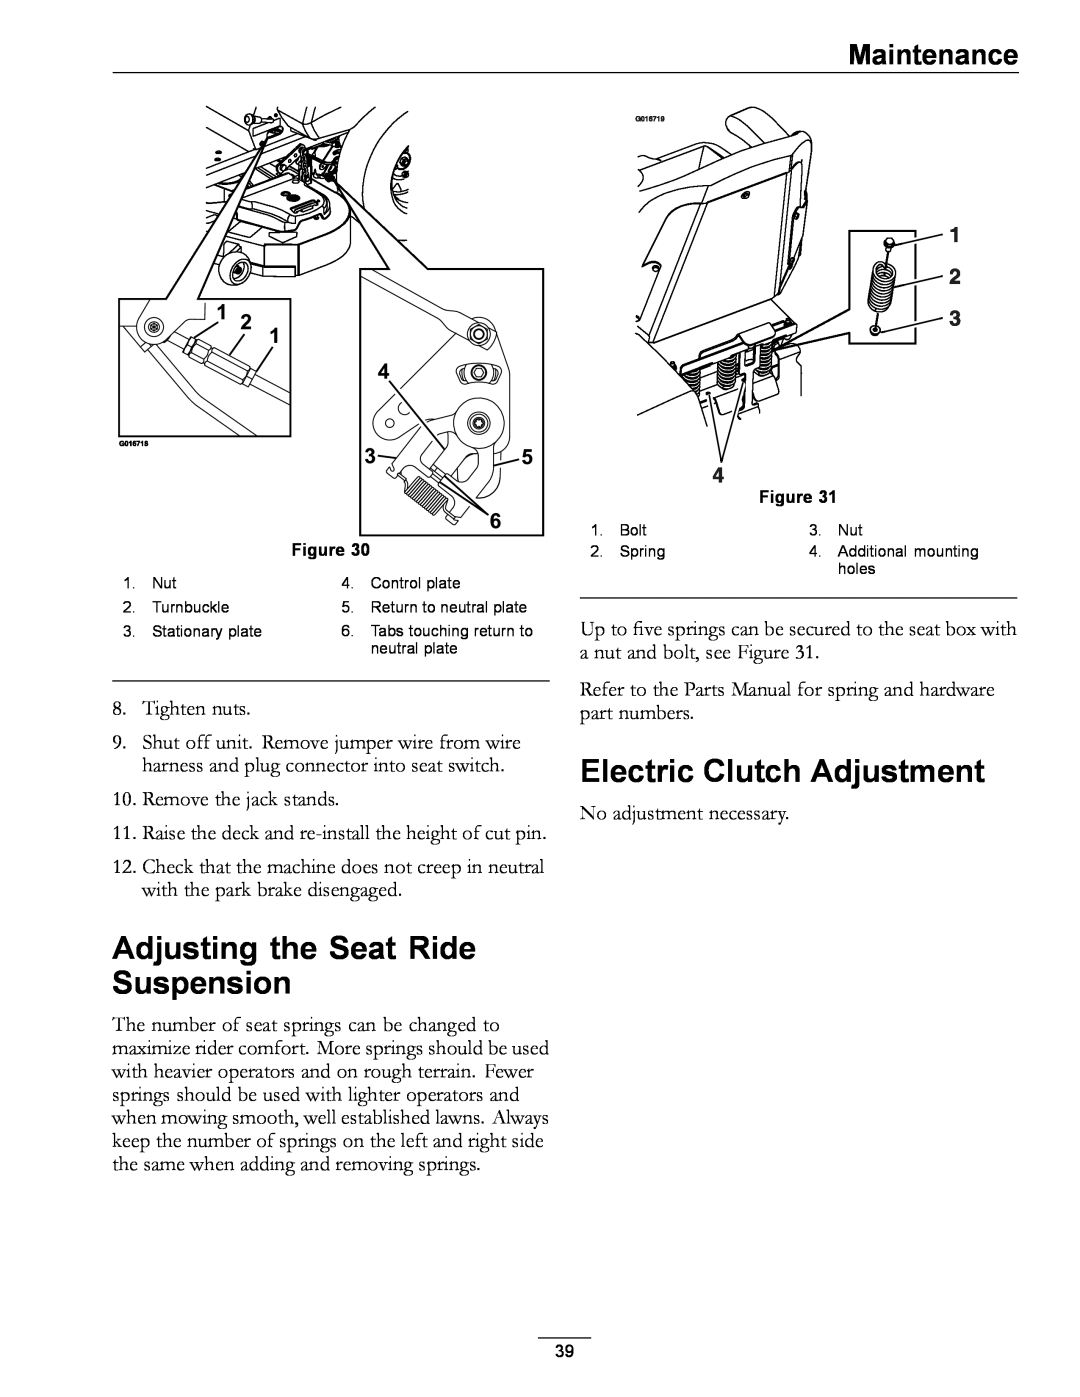 Exmark 4500-996 Rev A manual Adjusting the Seat Ride Suspension, Electric Clutch Adjustment, Maintenance, Tighten nuts 